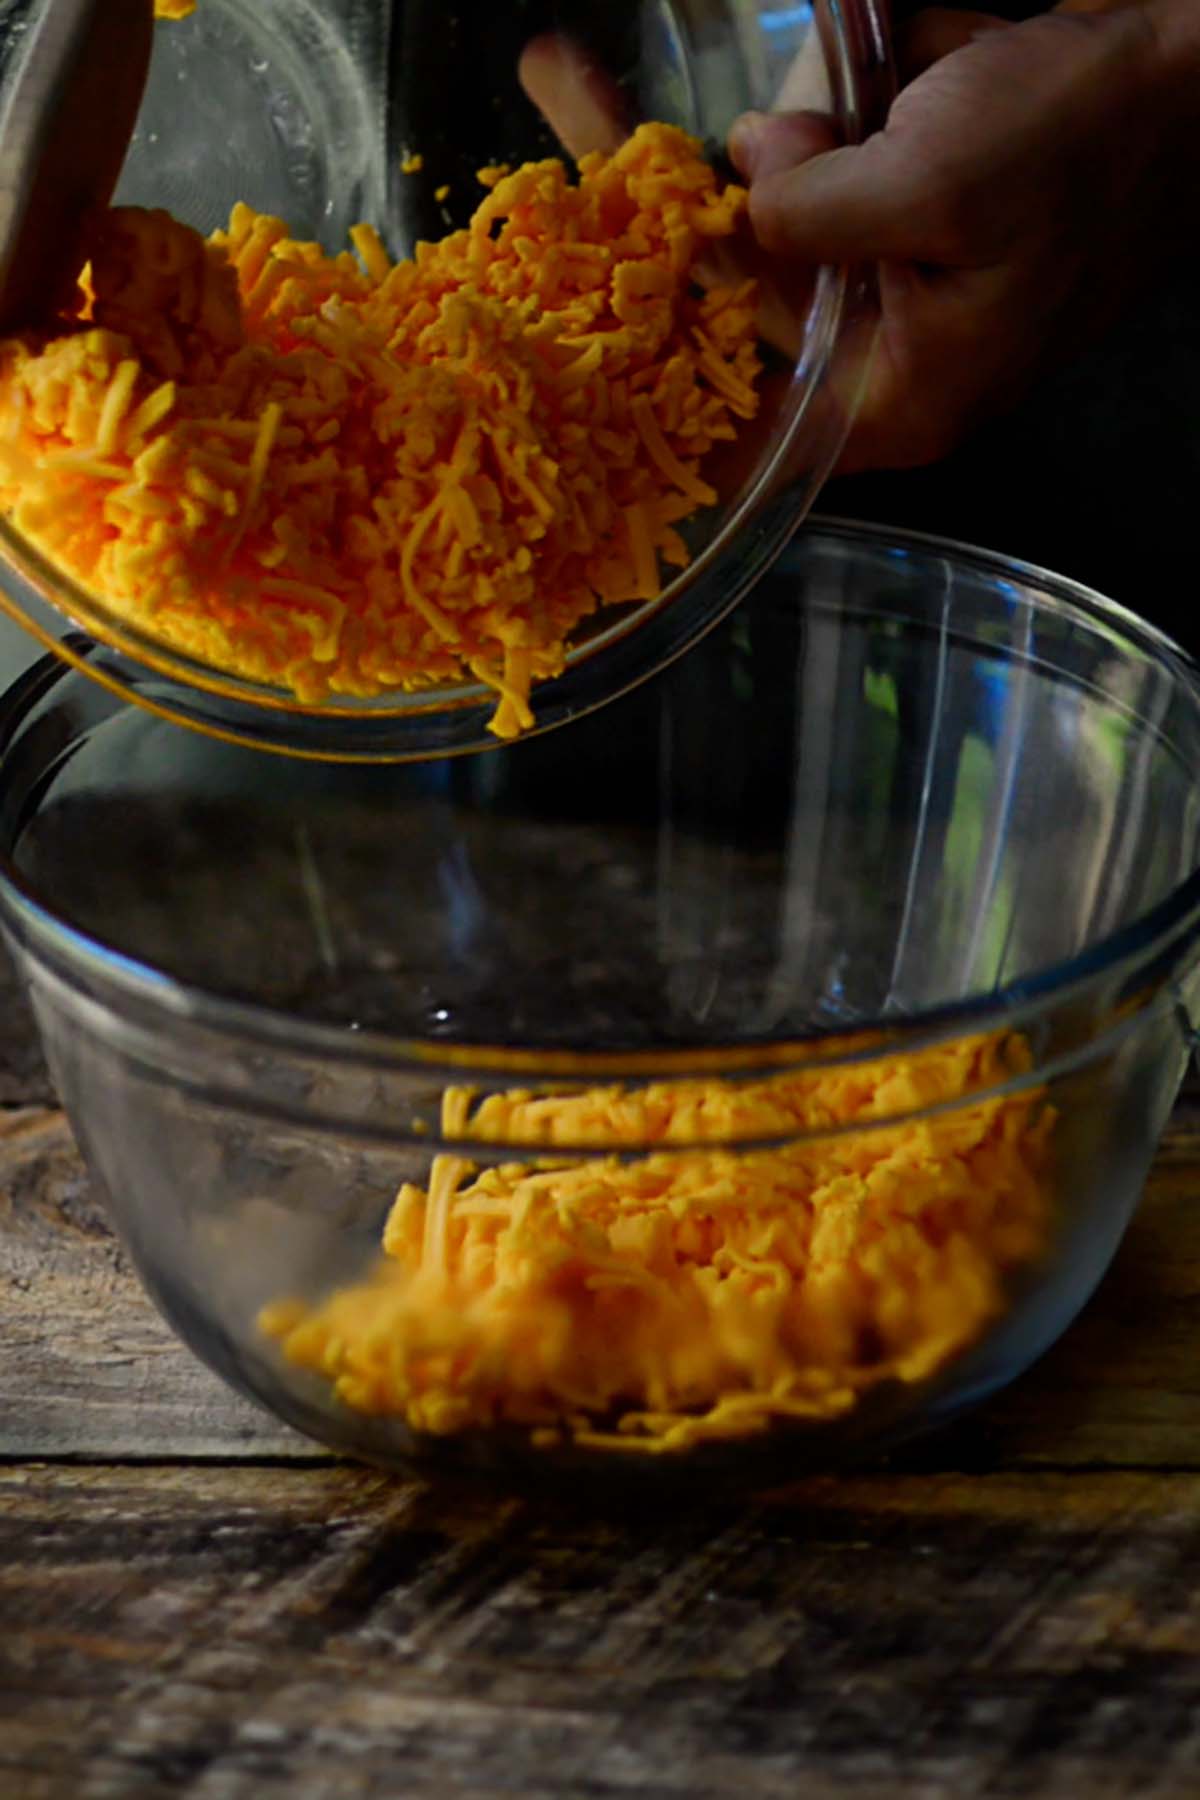 Shredded cheddar cheese being poured into a glass mixing bowl.